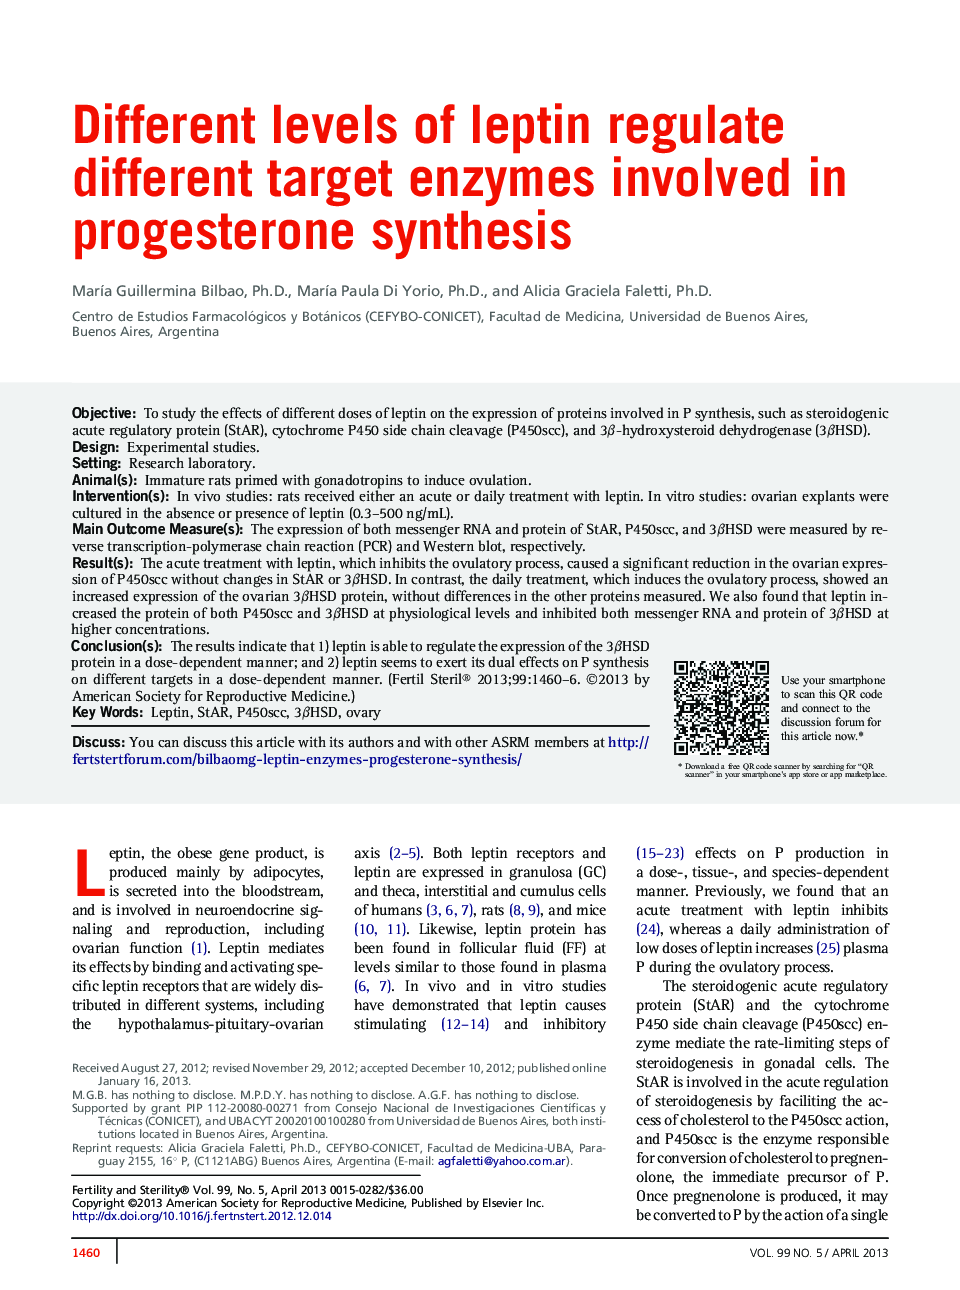 Different levels of leptin regulate different target enzymes involved in progesterone synthesis 